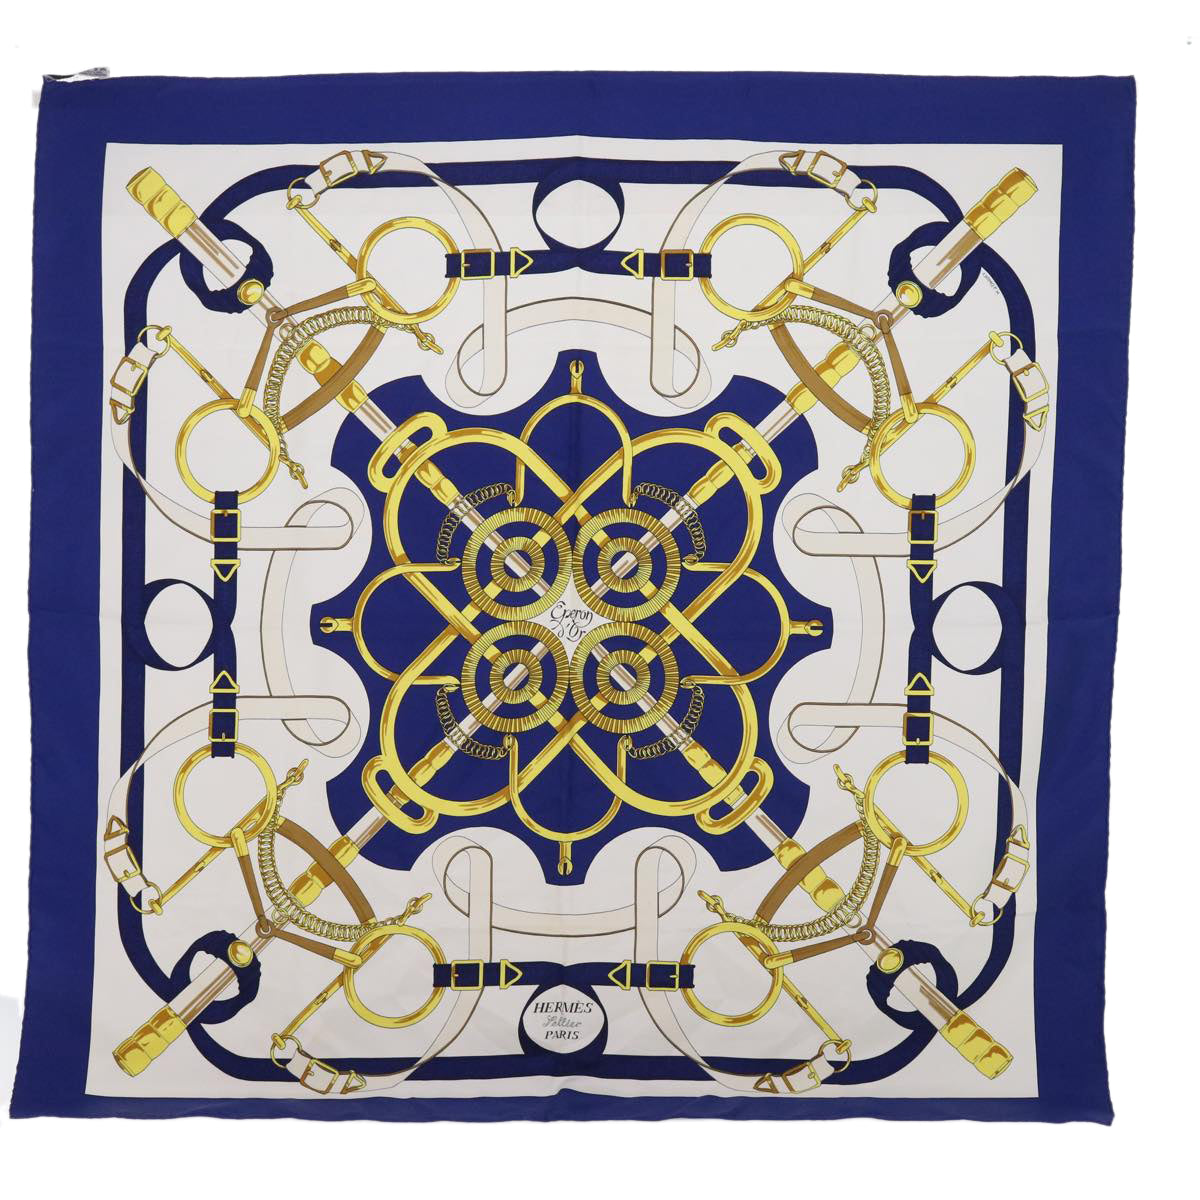 HERMES Carre 90 EPERON D'OR Scarf Silk Blue White Auth 55607